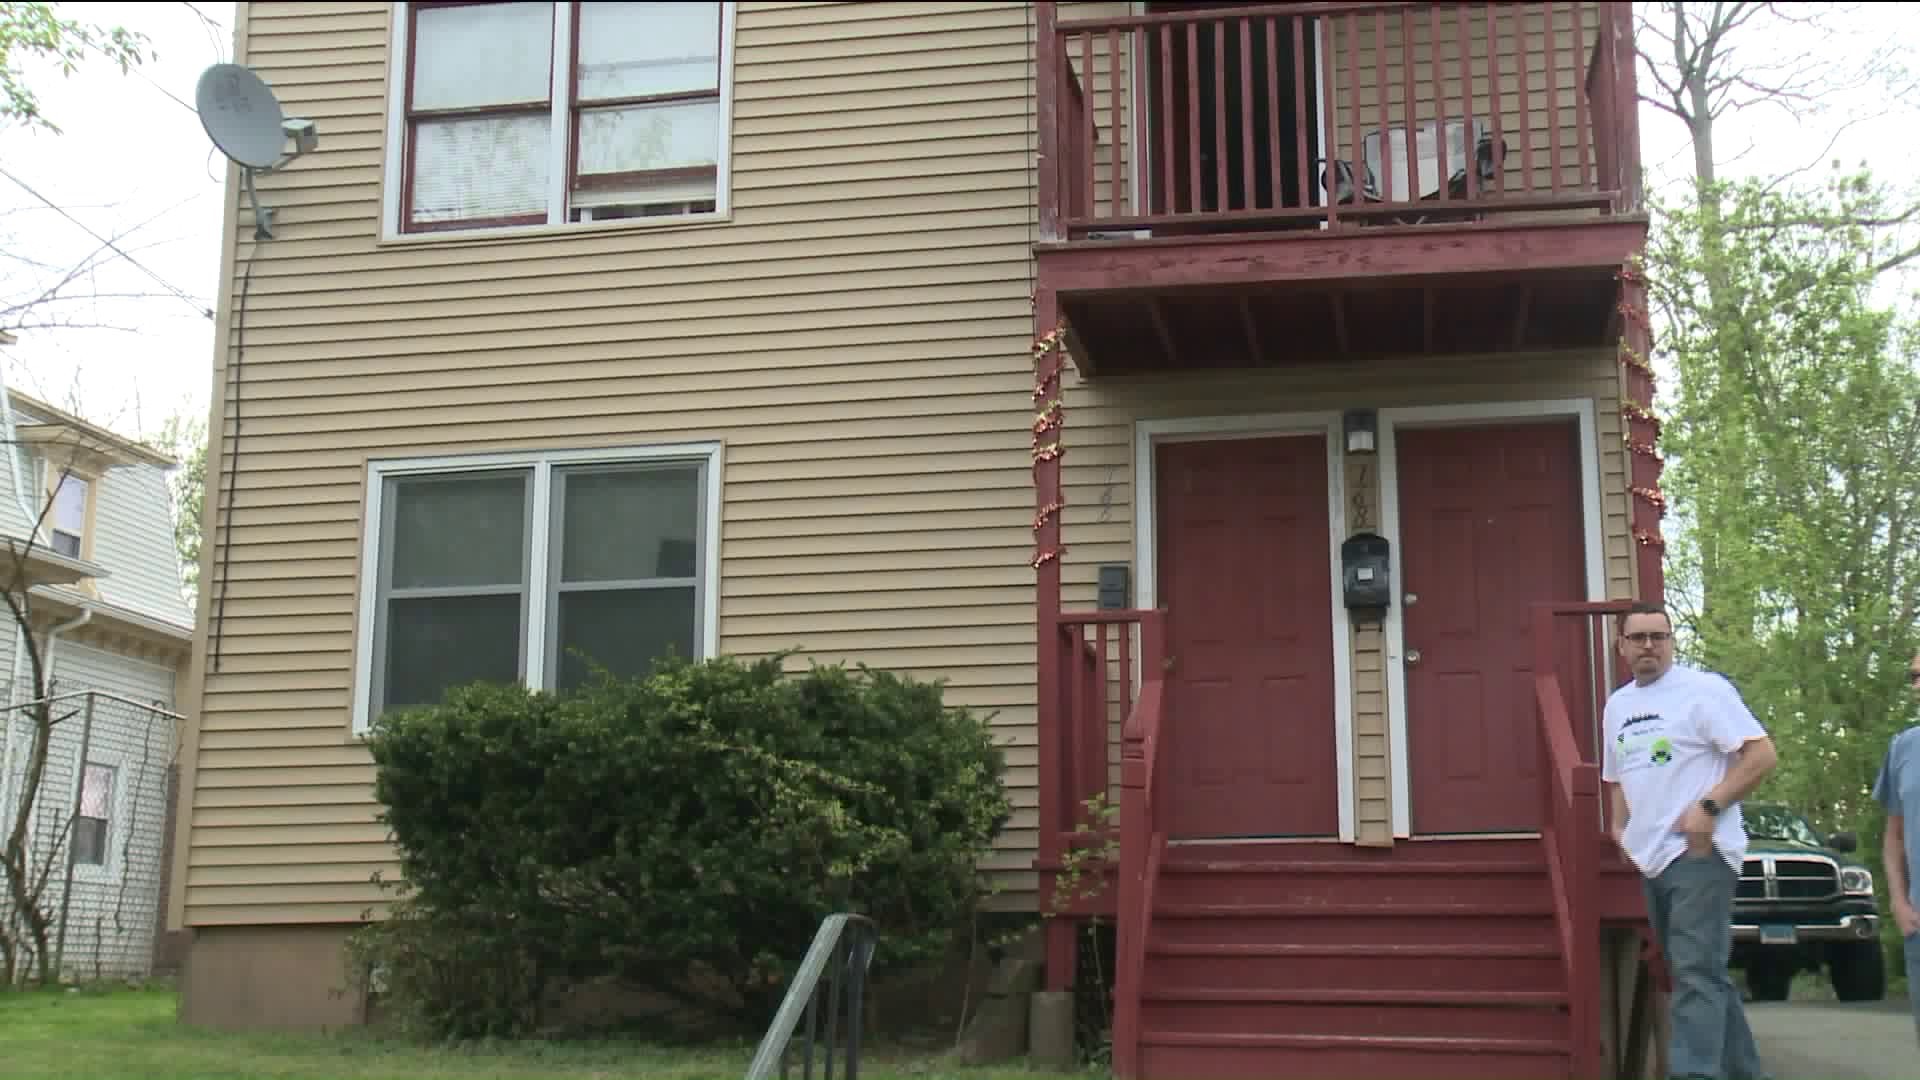 Community gathers to rebuild home in Hartford